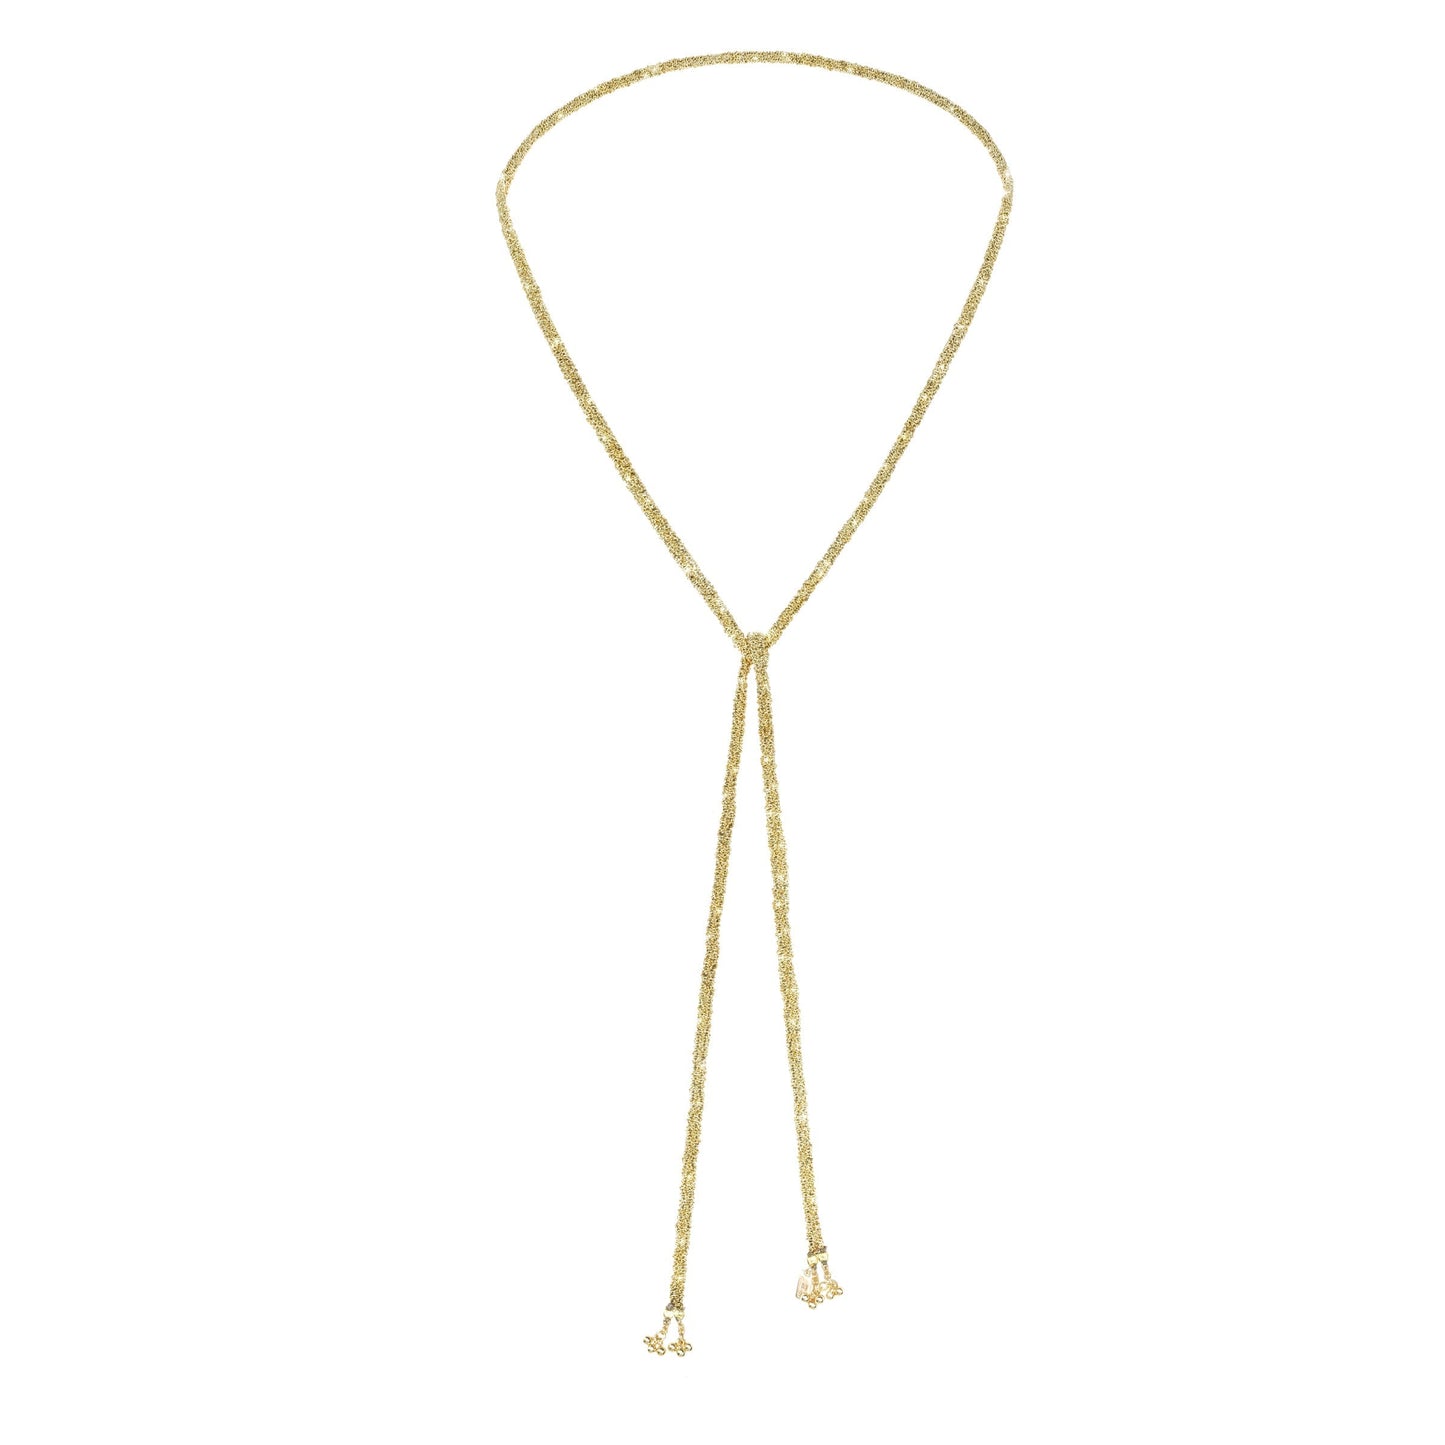 Woven Ribbon Necklace in Gold